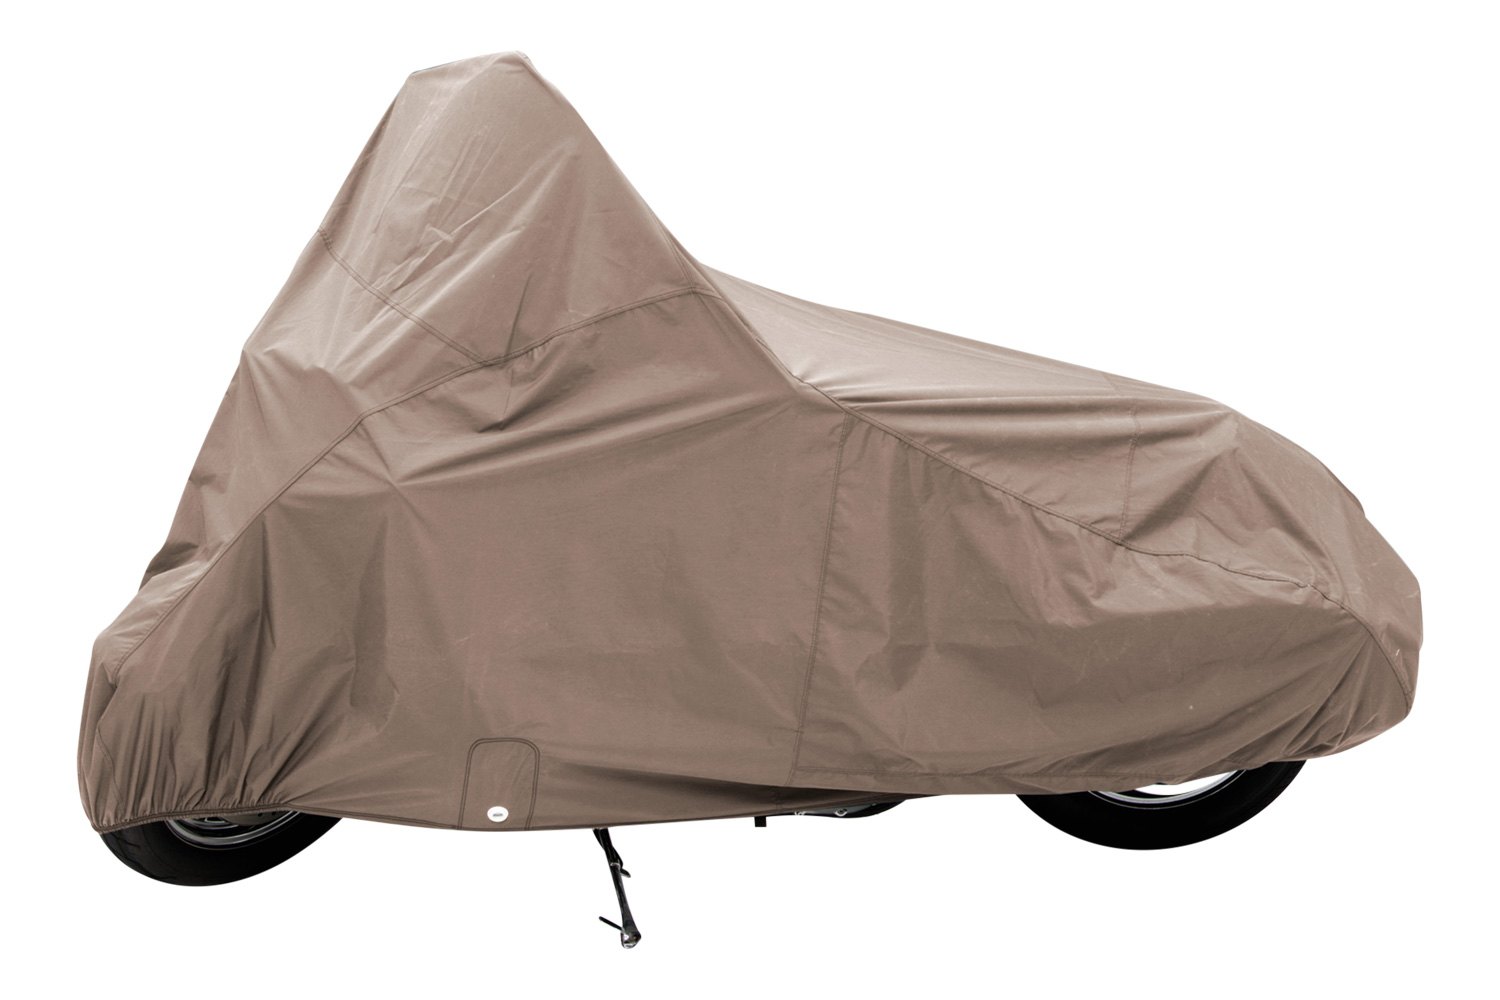 Covercraft® Pack Lite™ Custom Fit Harley-Davidson Motorcycle Cover 